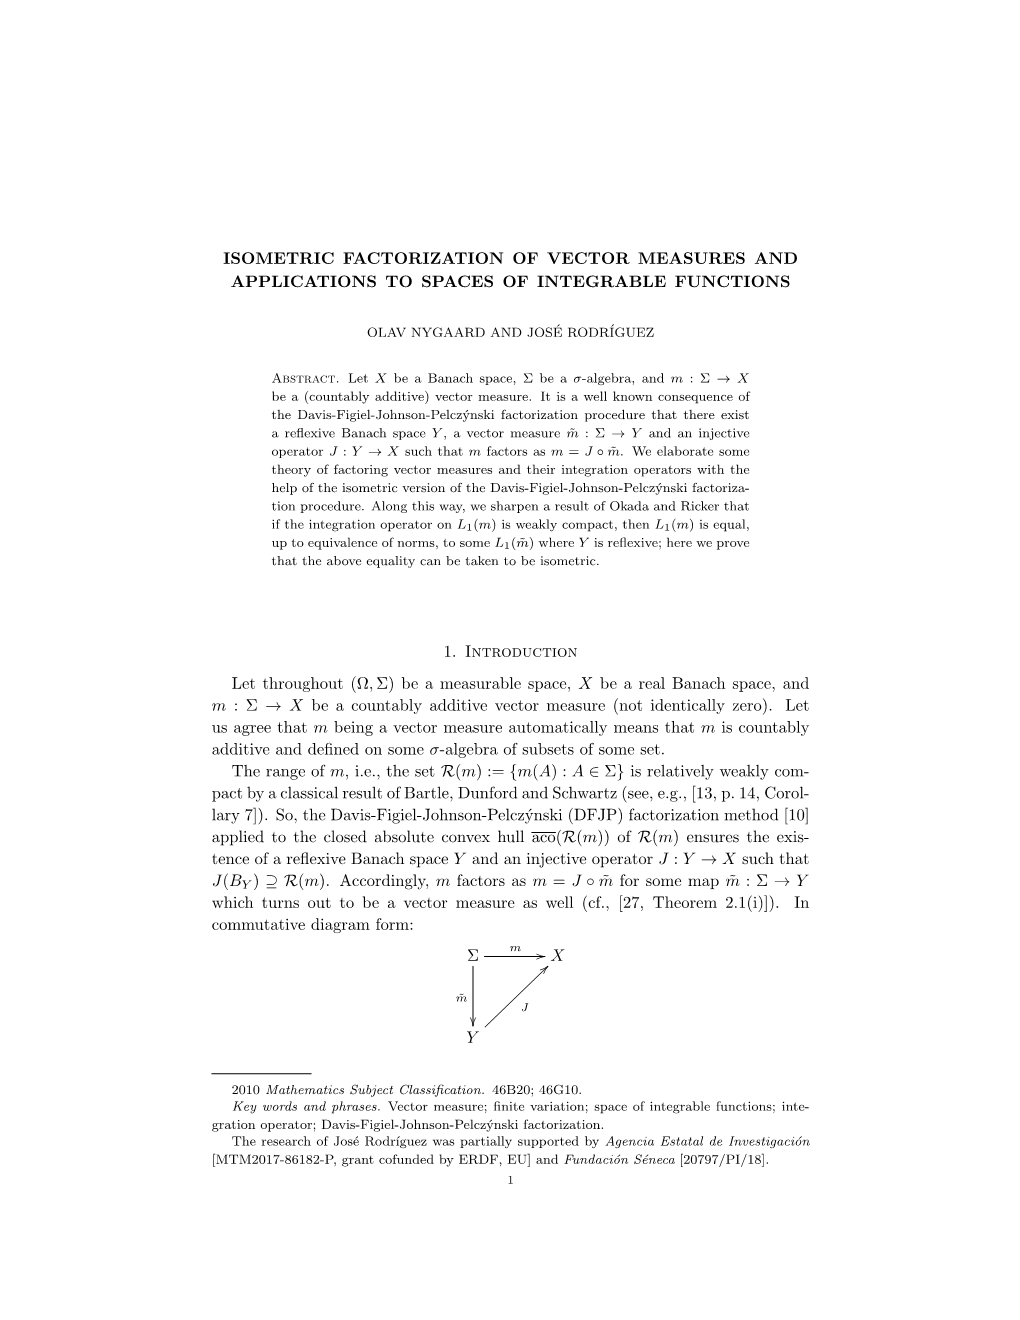 ISOMETRIC FACTORIZATION of VECTOR MEASURES and APPLICATIONS to SPACES of INTEGRABLE FUNCTIONS 1. Introduction Let Throughout